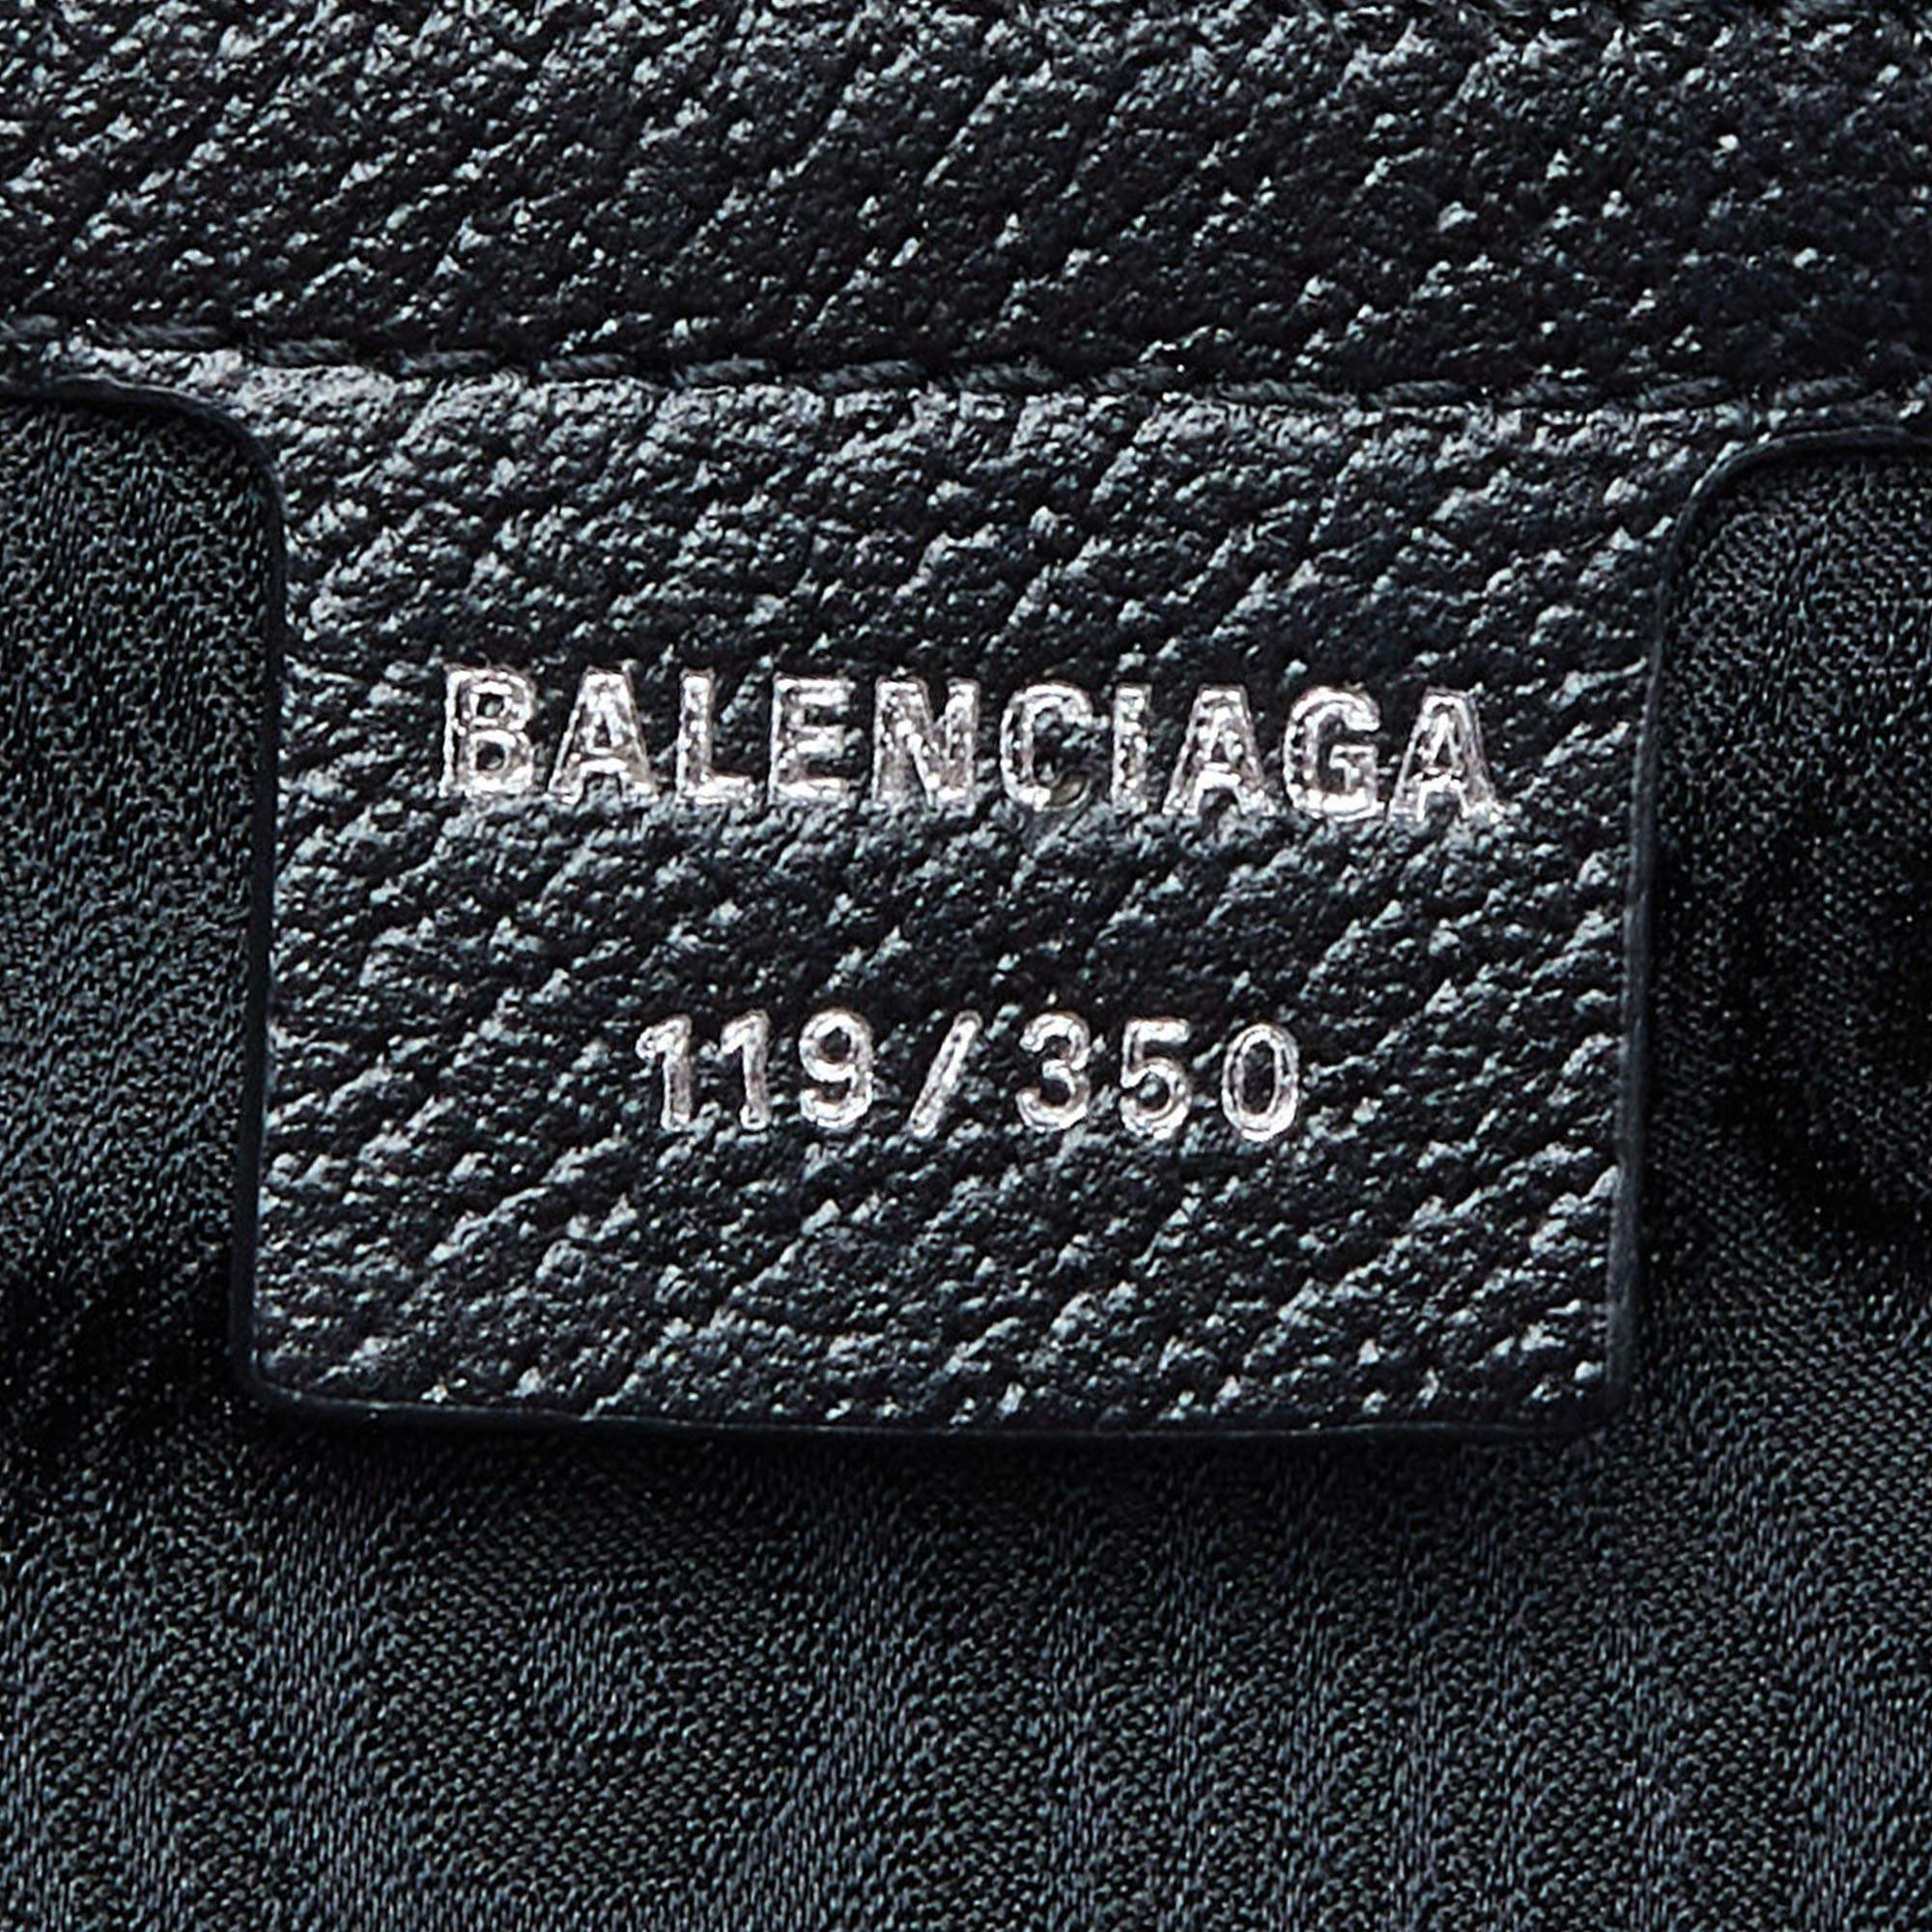 Balenciaga x Gucci Black Canvas and Leather The Hacker Project Duffle Bag 3